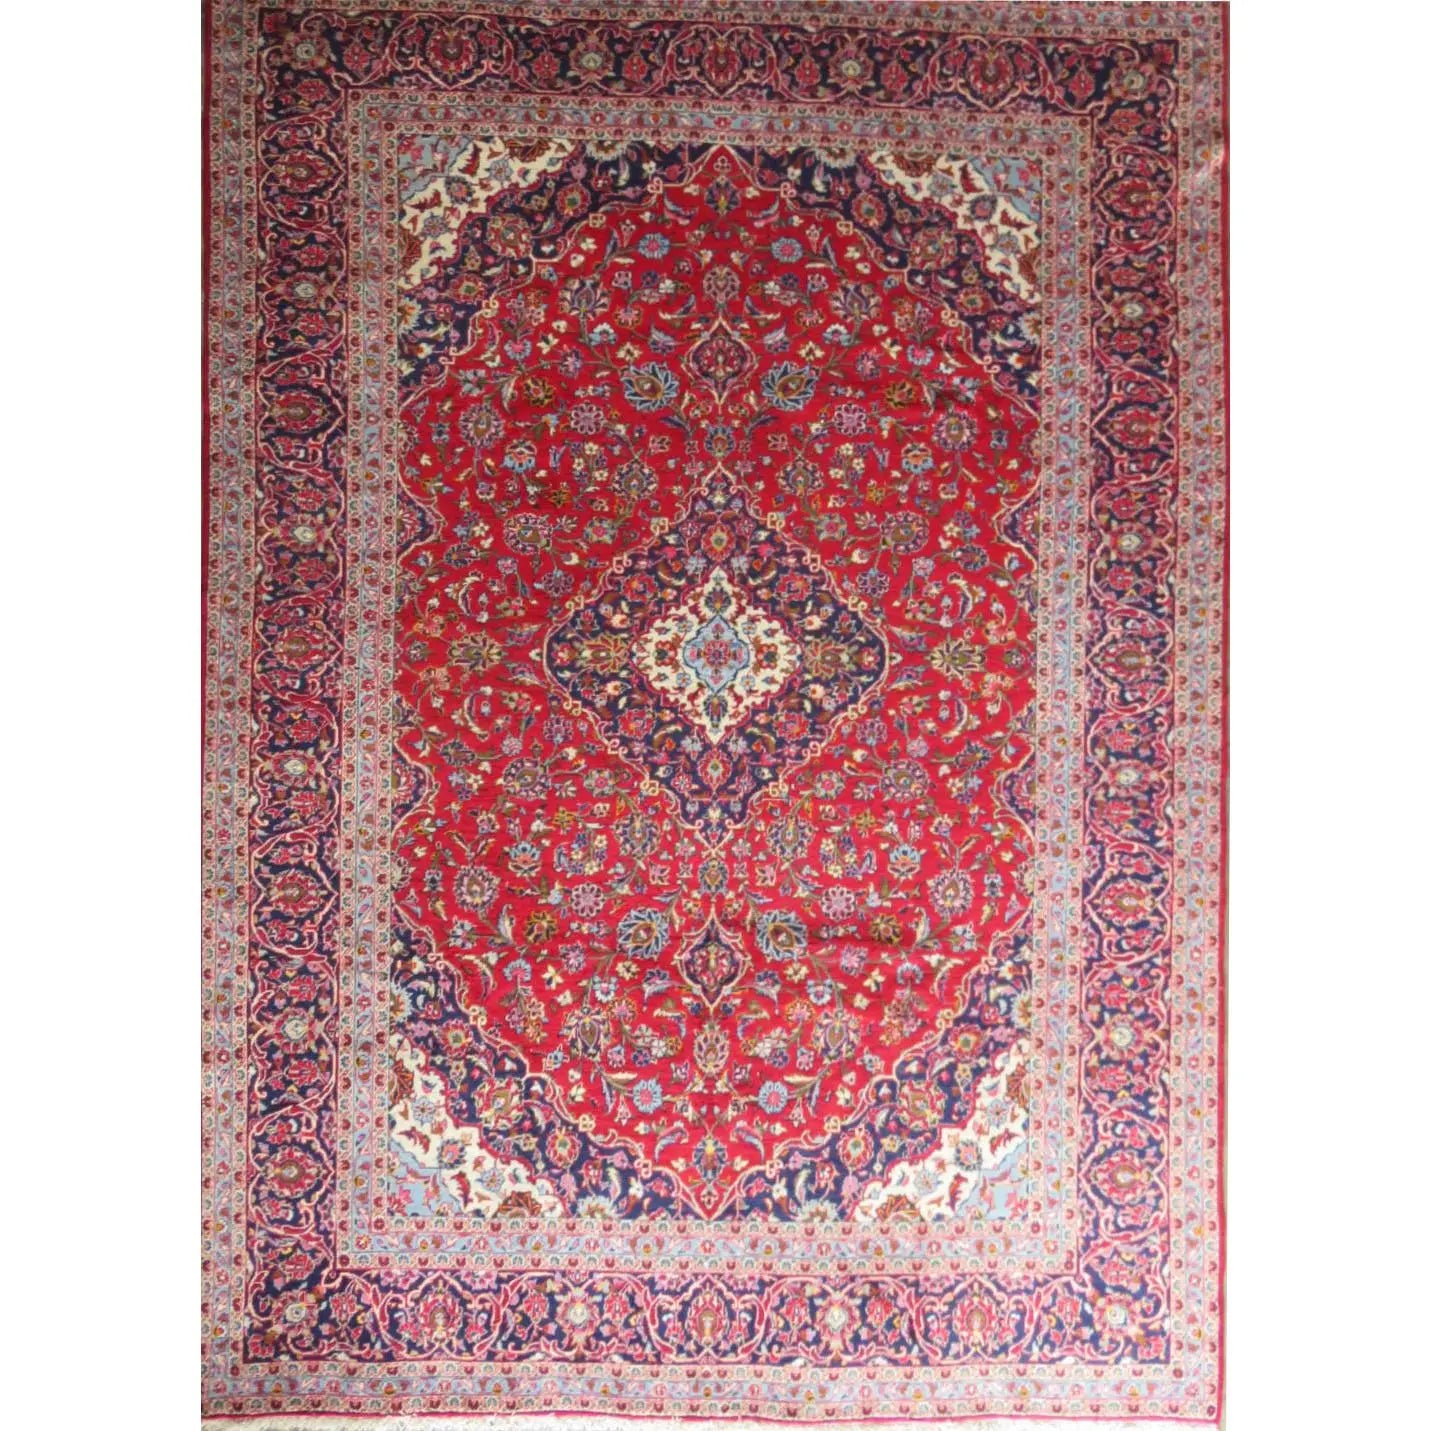 Hand-Knotted Persian Wool Rug _ Luxurious Vintage Design, 13'3" x 9'4", Artisan Crafted